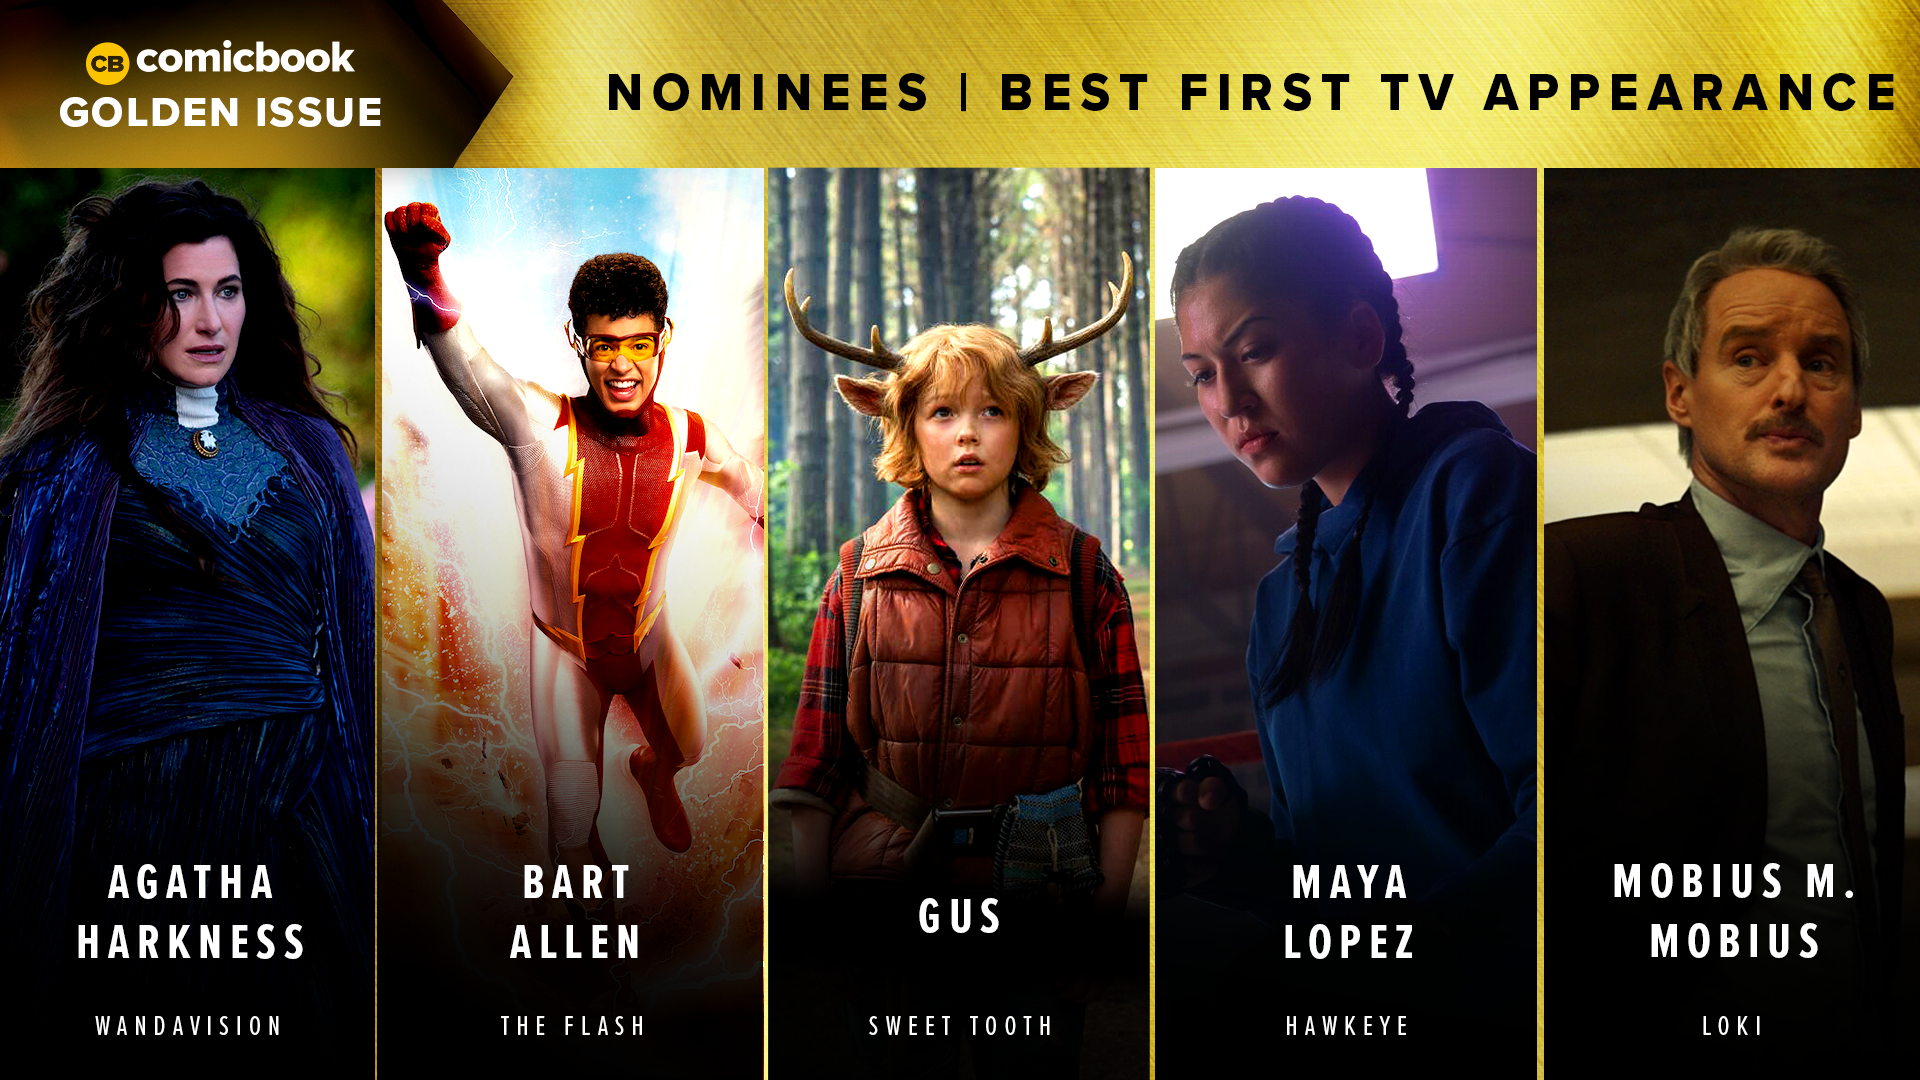 golden-issues-2021-nominees-best-first-tv-appearance.png